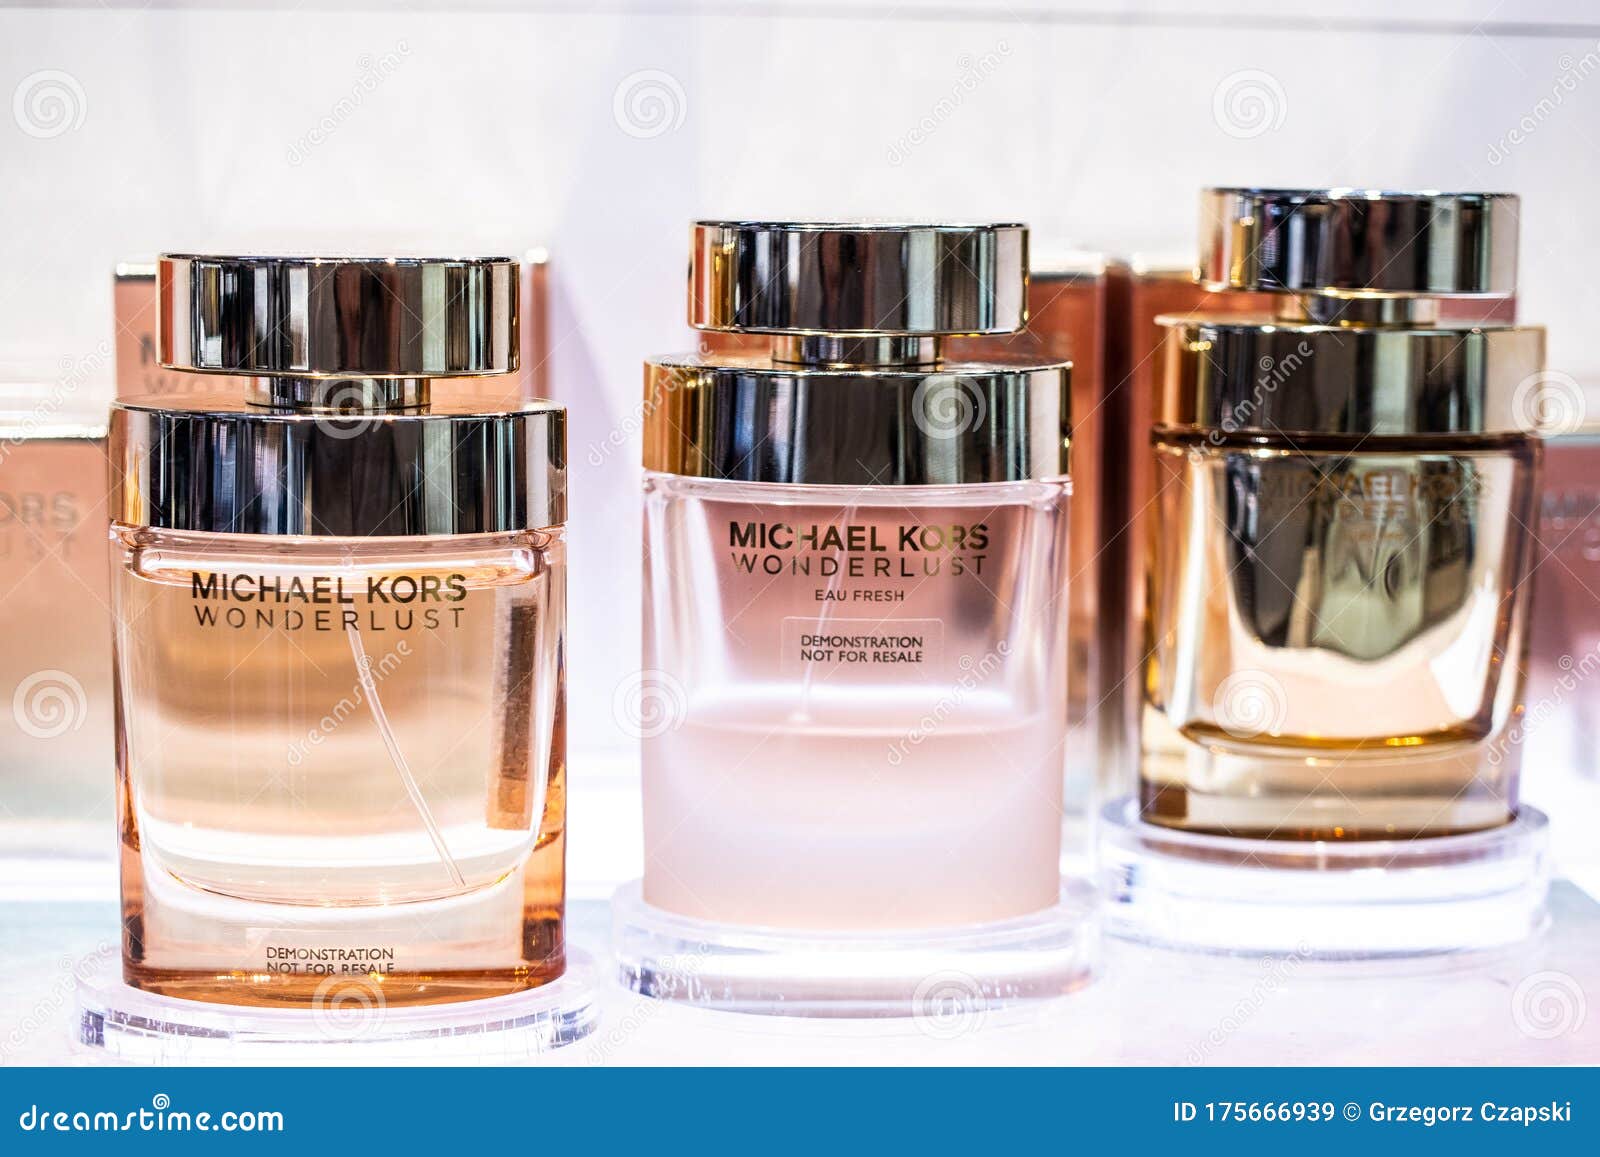 Kors Wonderlust Perfume on the Shop Display for Fragrance Created by Kors Editorial Stock - Image of female, brussels: 175666939